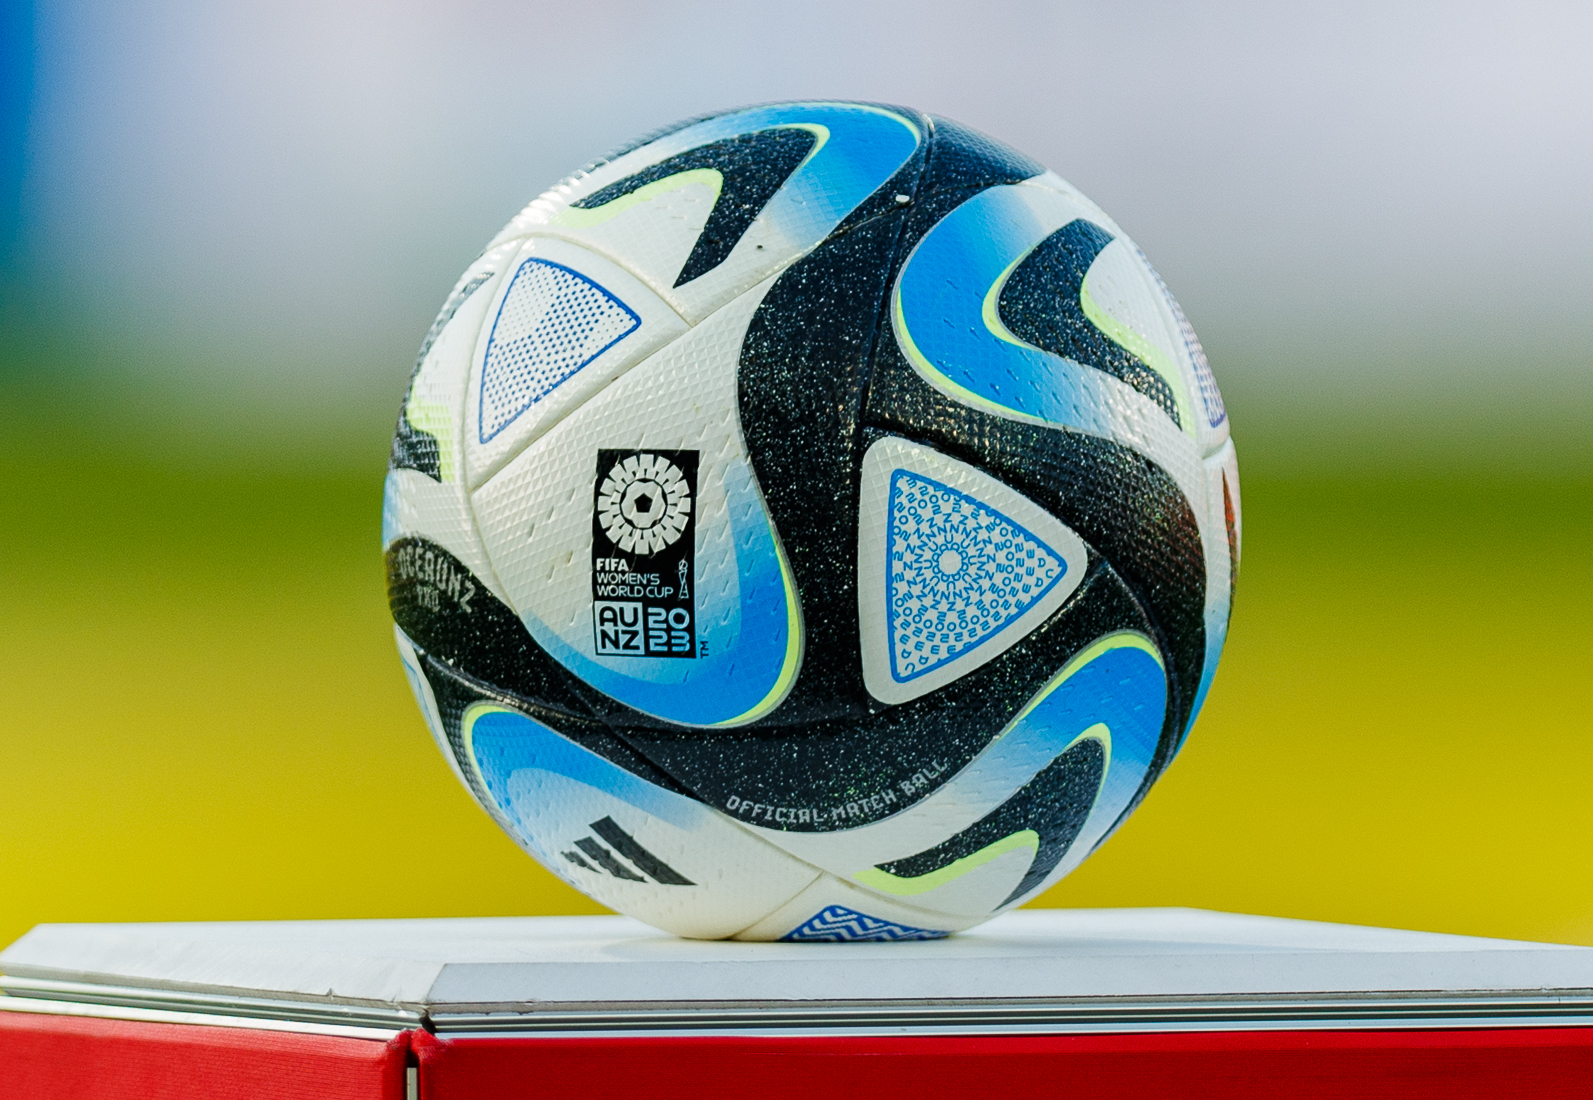 The Adidas Oceaunz ball, the official matchball of the 2023 FIFA Women’s World Cup, is different from the design used in the semi-finals, third place game, and the final, the Adidas Oceaunz Final Pro. This ball has an orange and gold coloration, similar to a sunset.